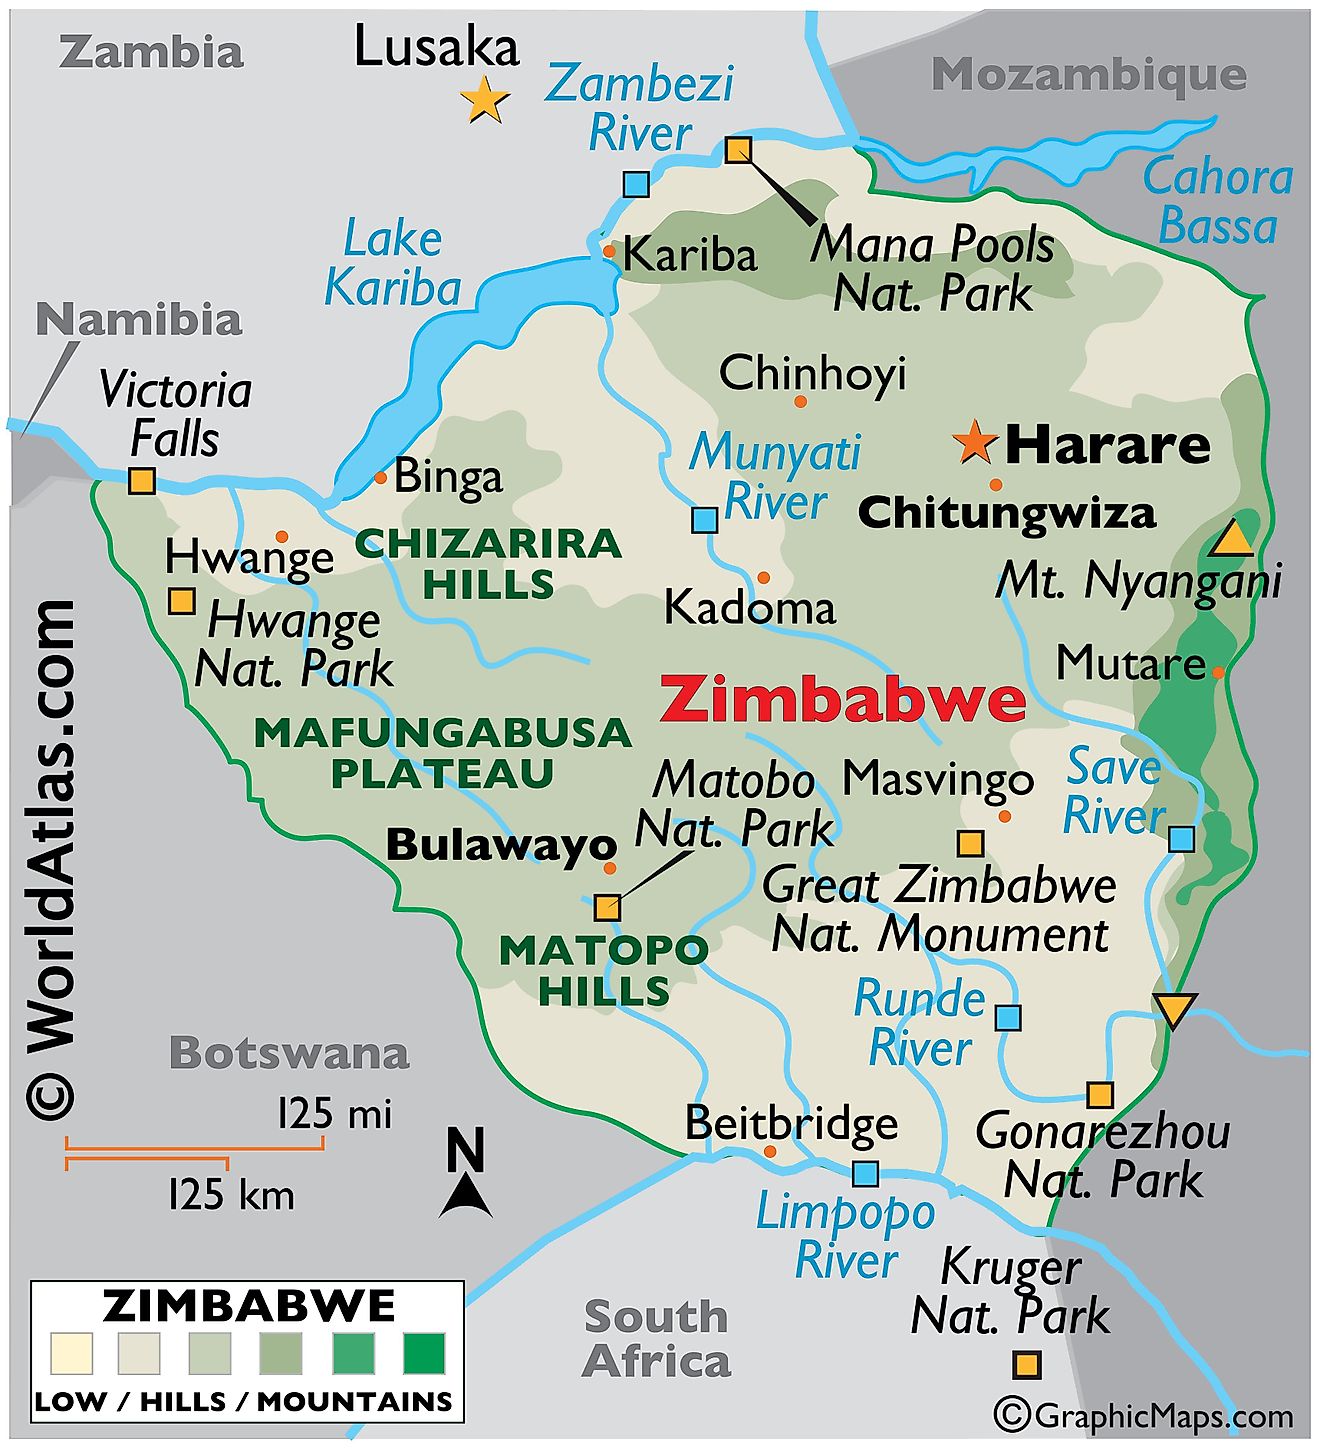 Physical Map of Zimbabwe showing the physical features of the country including mountain ranges, rivers, major lakes, and important protected areas.